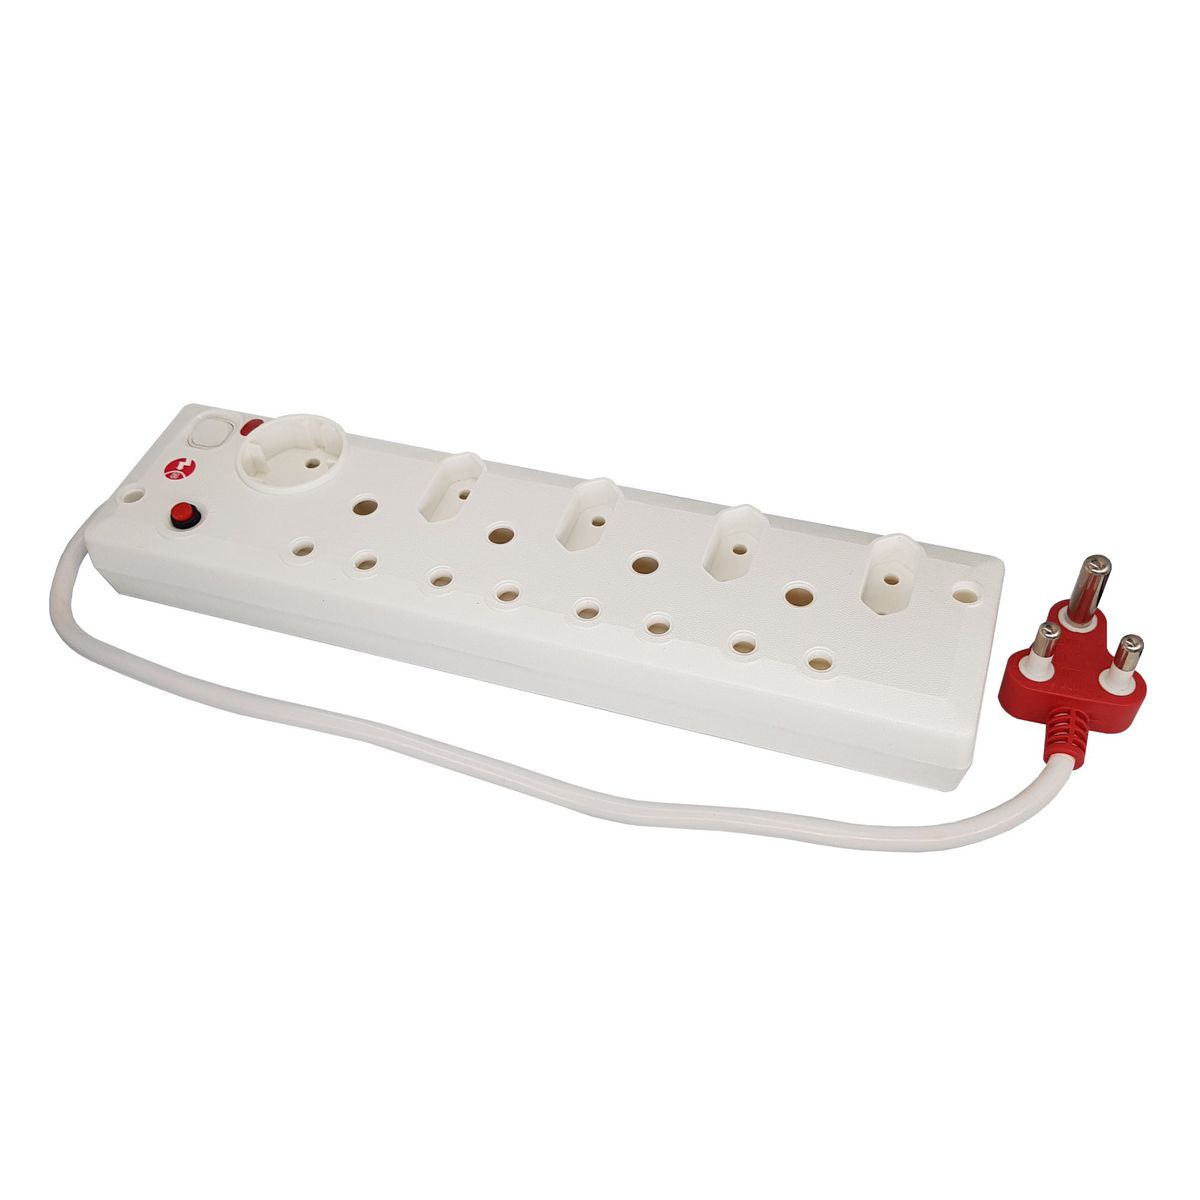 Ultra-Link: 9 Way Multi Plug With Surge Protection